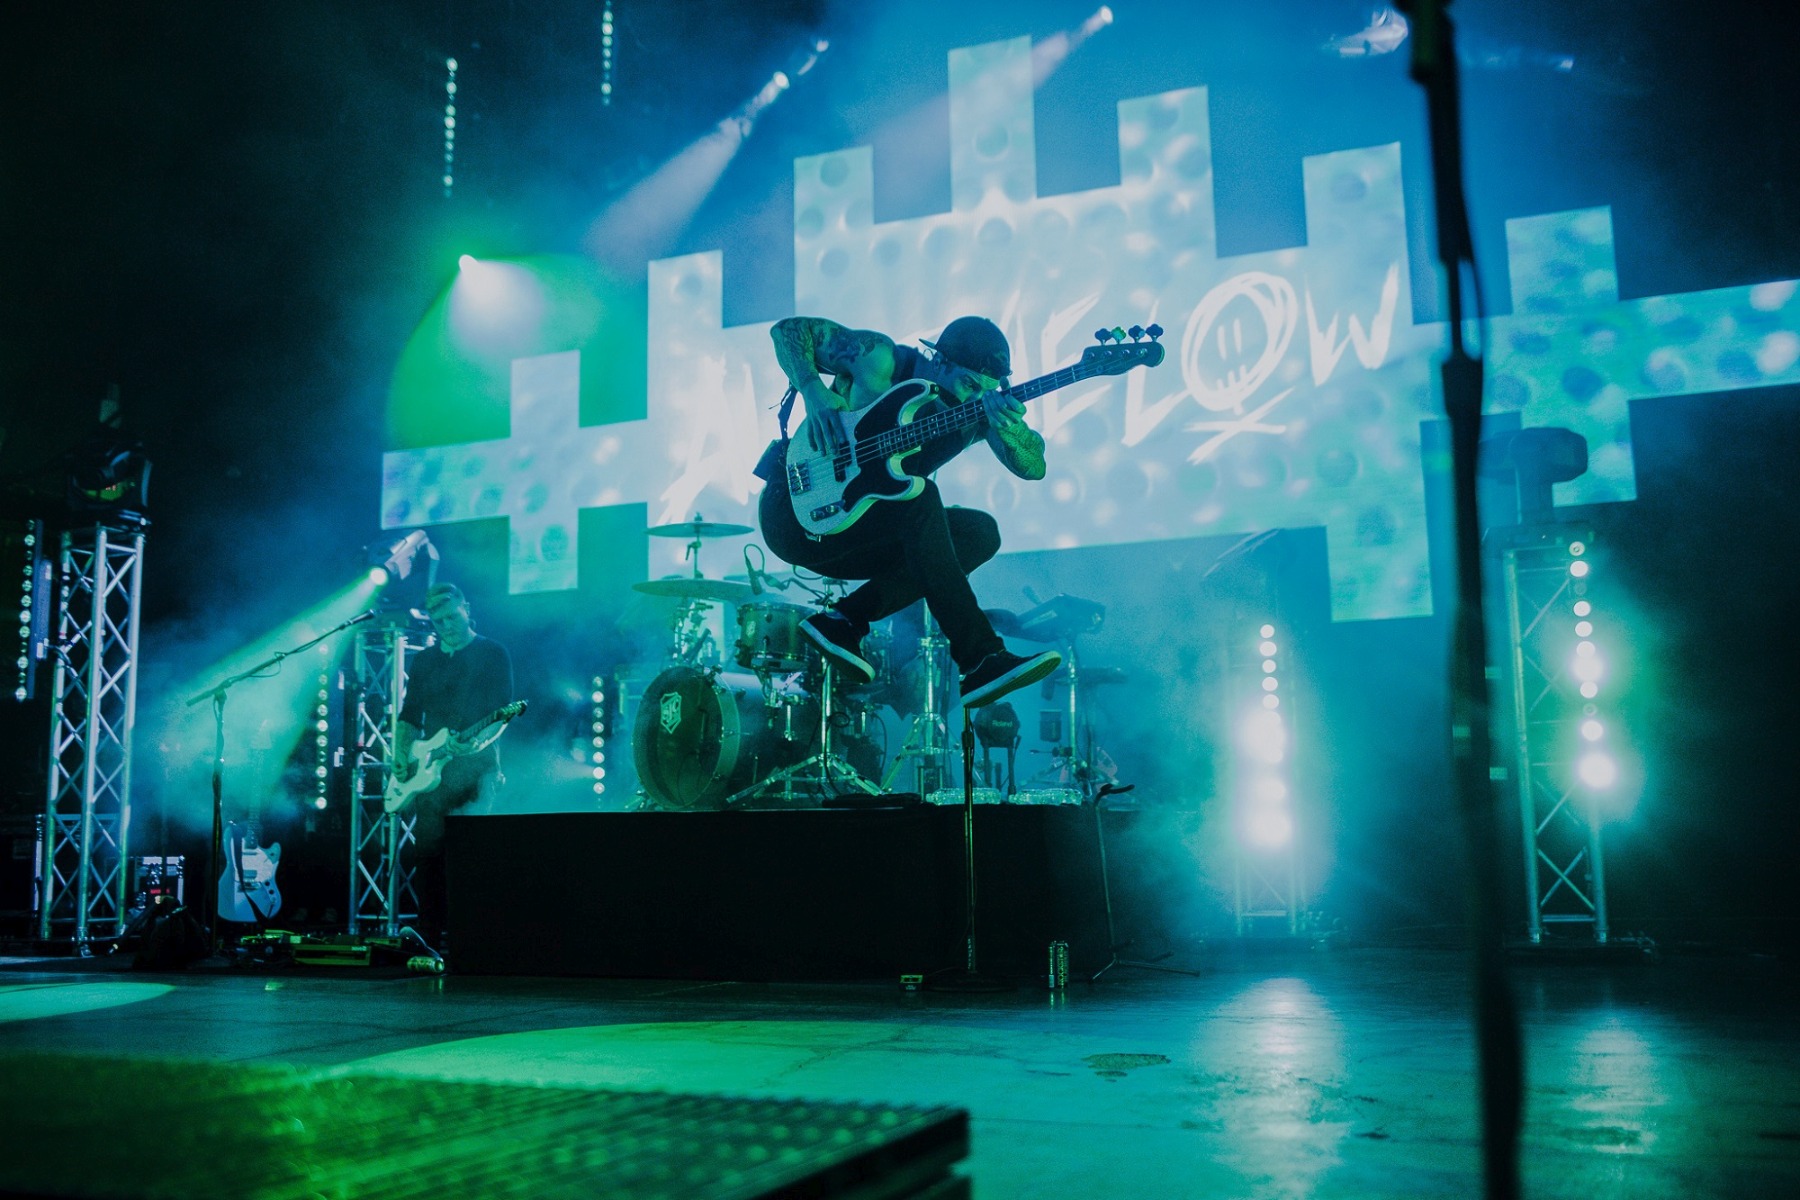 All Time Low’s Summer U.S. Tour Features Elation Lighting and VideoGallery Image all time low 2017 u.s. tour matt vogel photo 1 